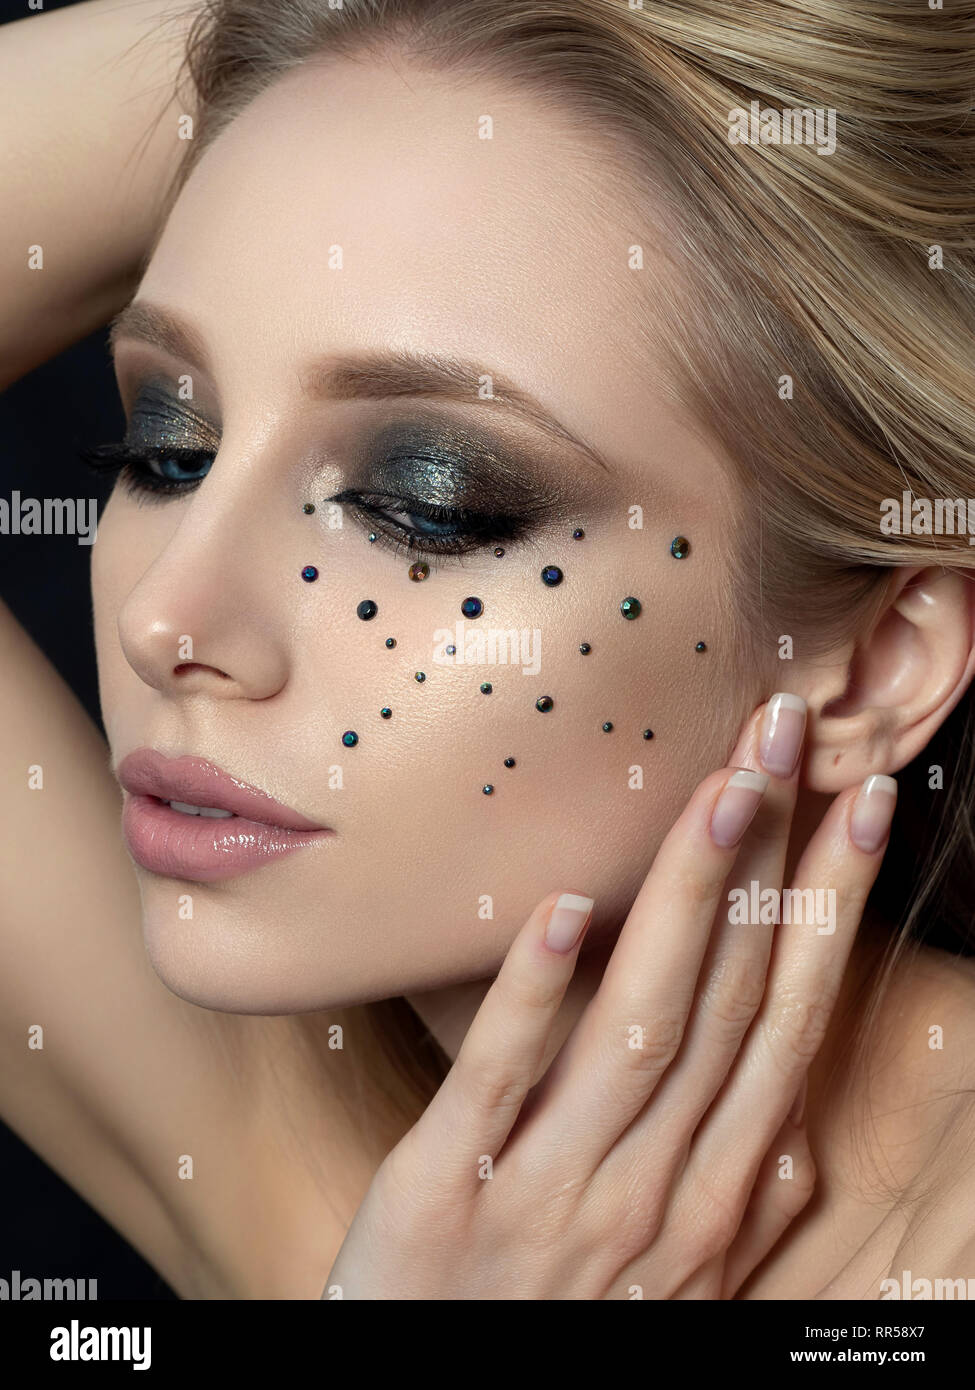 9,484 Makeup Rhinestone Images, Stock Photos, 3D objects, & Vectors